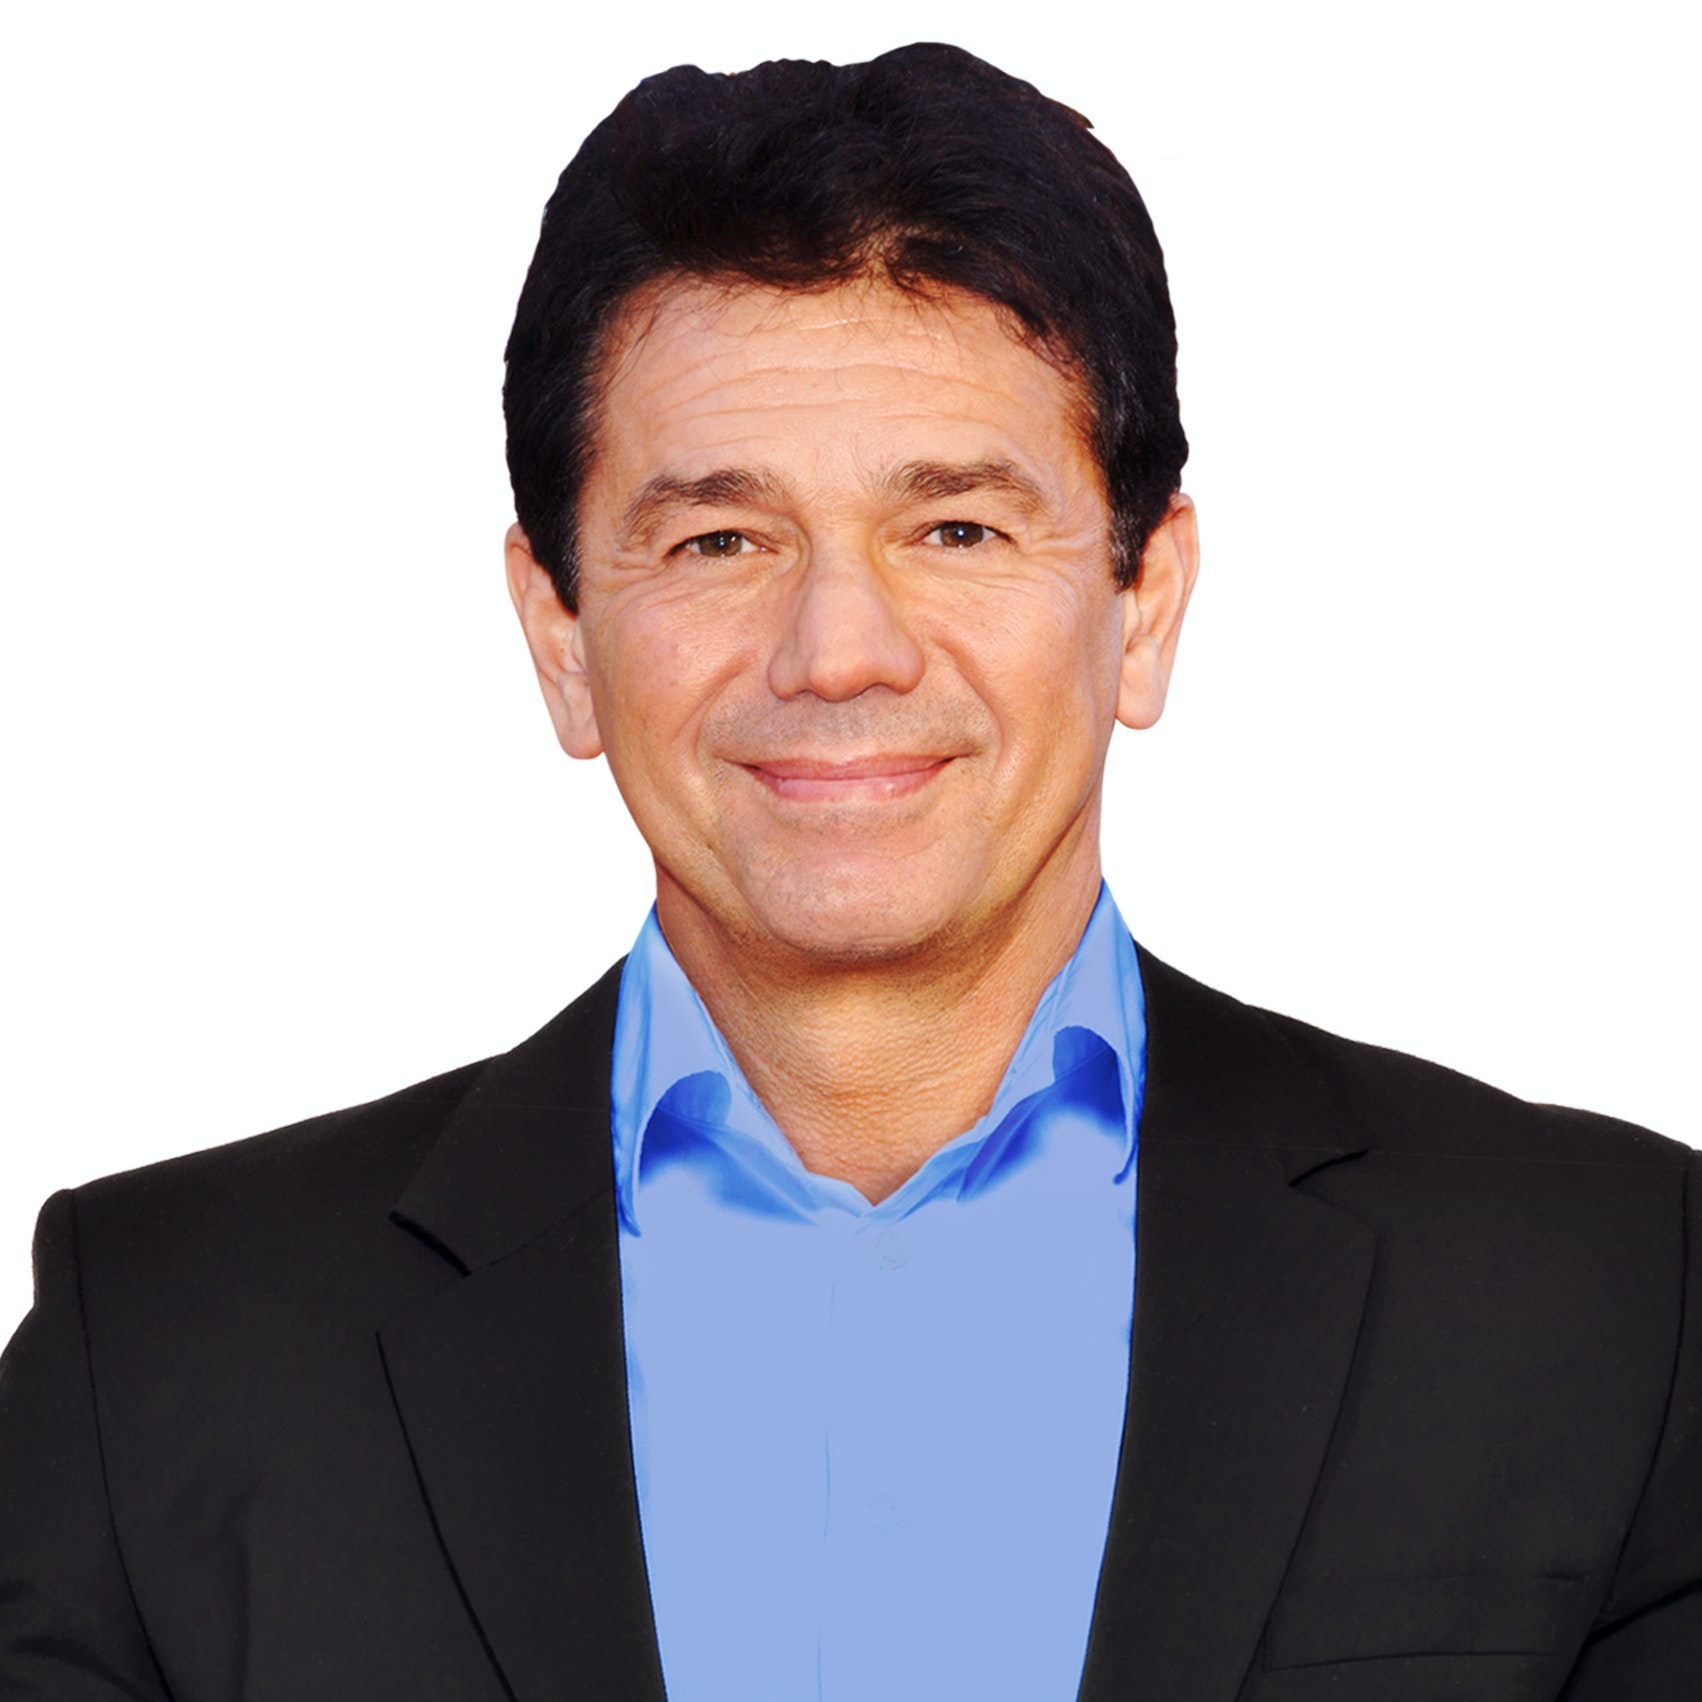 Additionally, he performed his own special "Adrian Zmed, In Concert&qu...